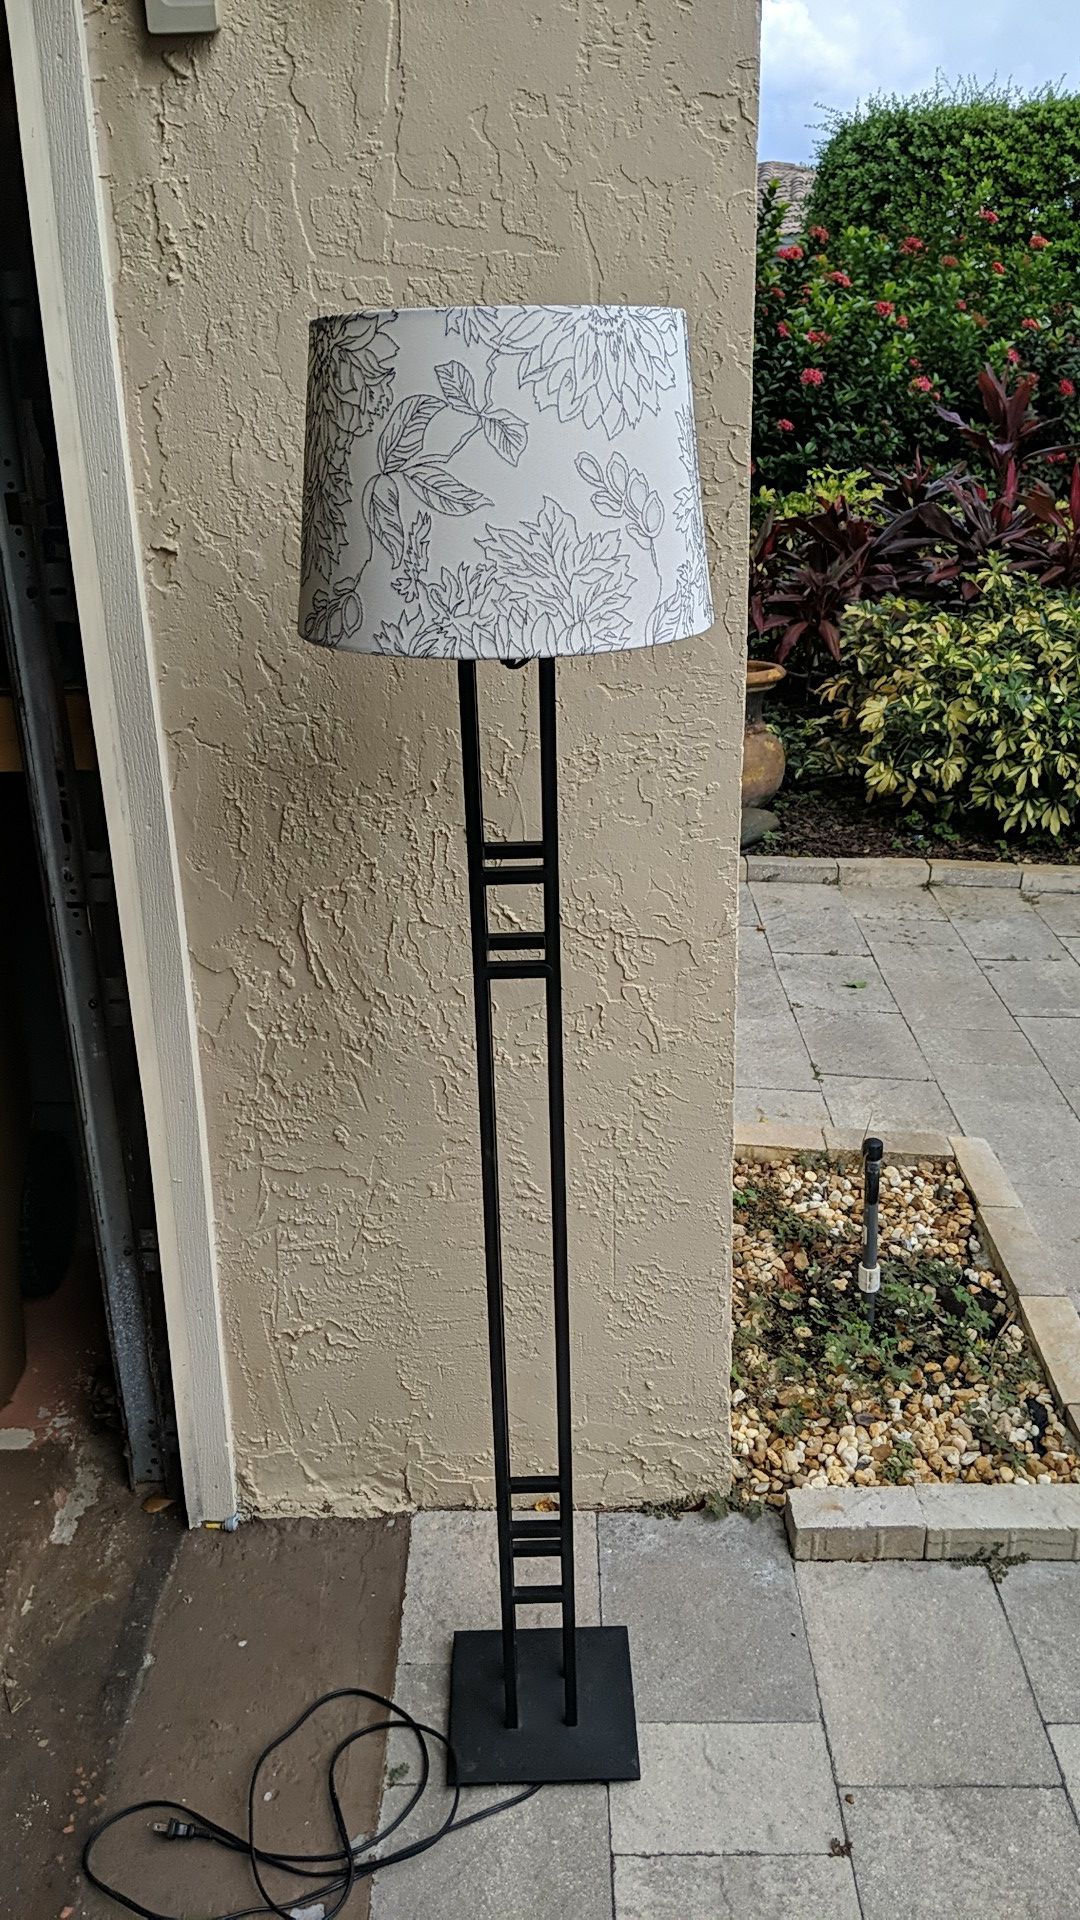 Metal Floor Lamp with shade